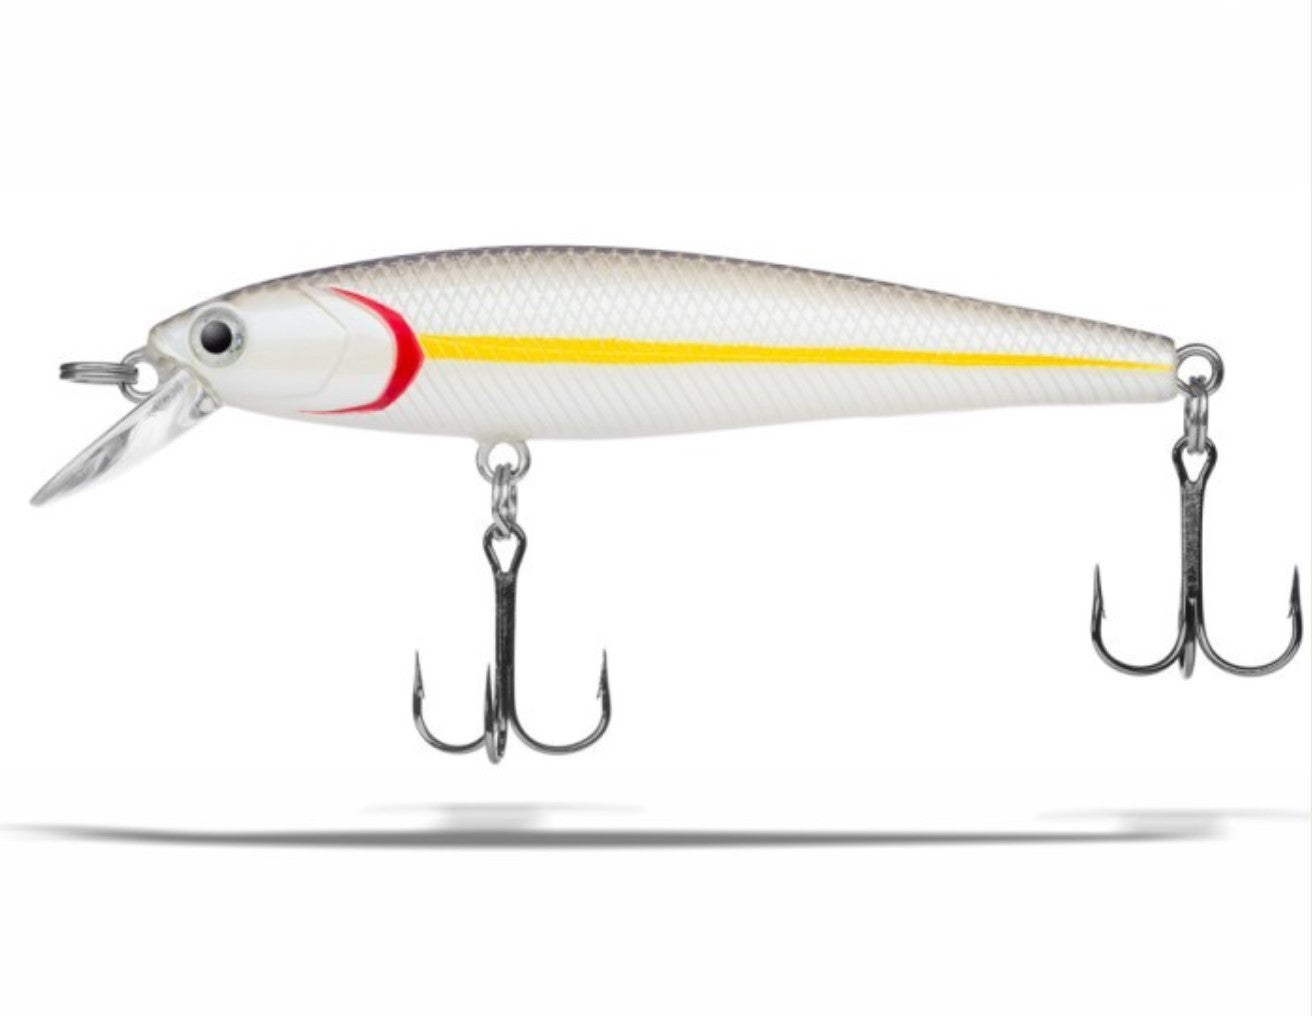 Dynamic Lures J-Spec (Chartreuse Shad) – Trophy Trout Lures and